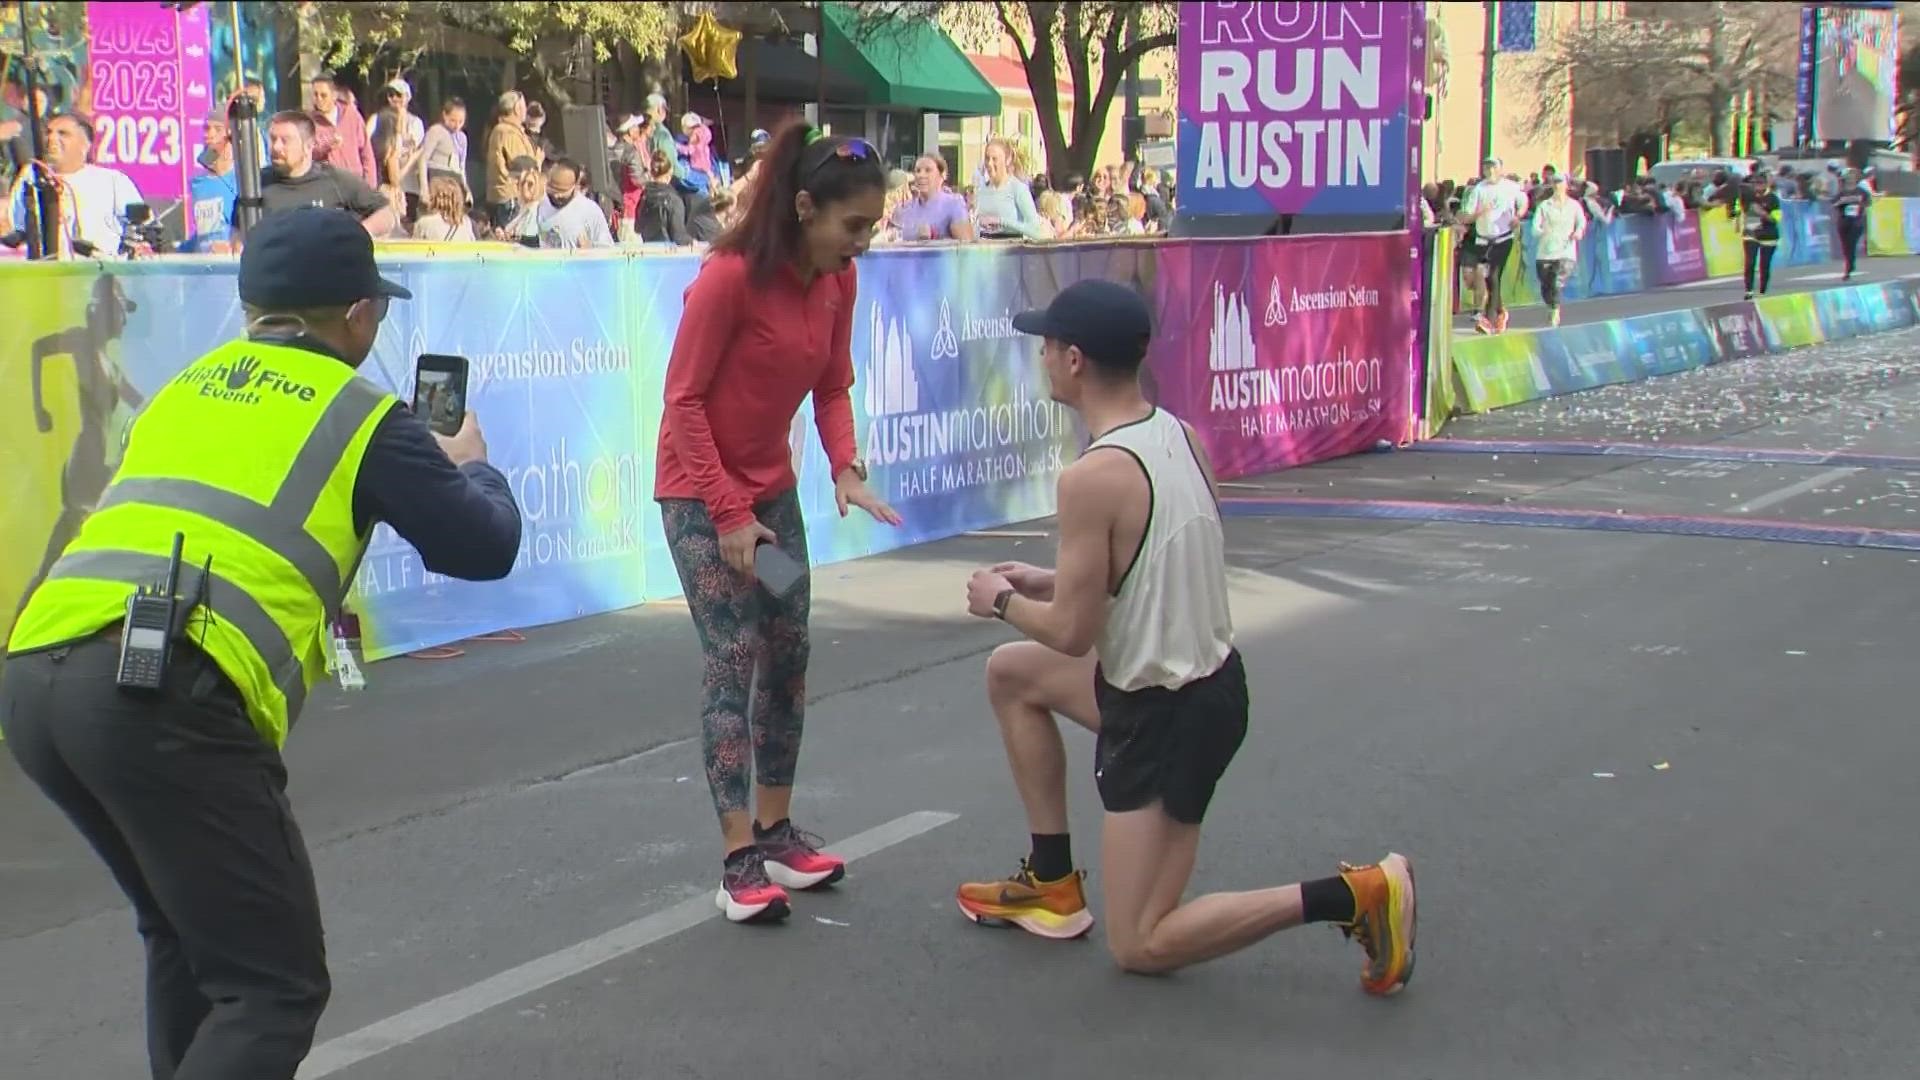 On Sunday, runners participated in the 2023 Austin Marathon, Half Marathon and 5K. At the finish line, there was a beautiful proposal.